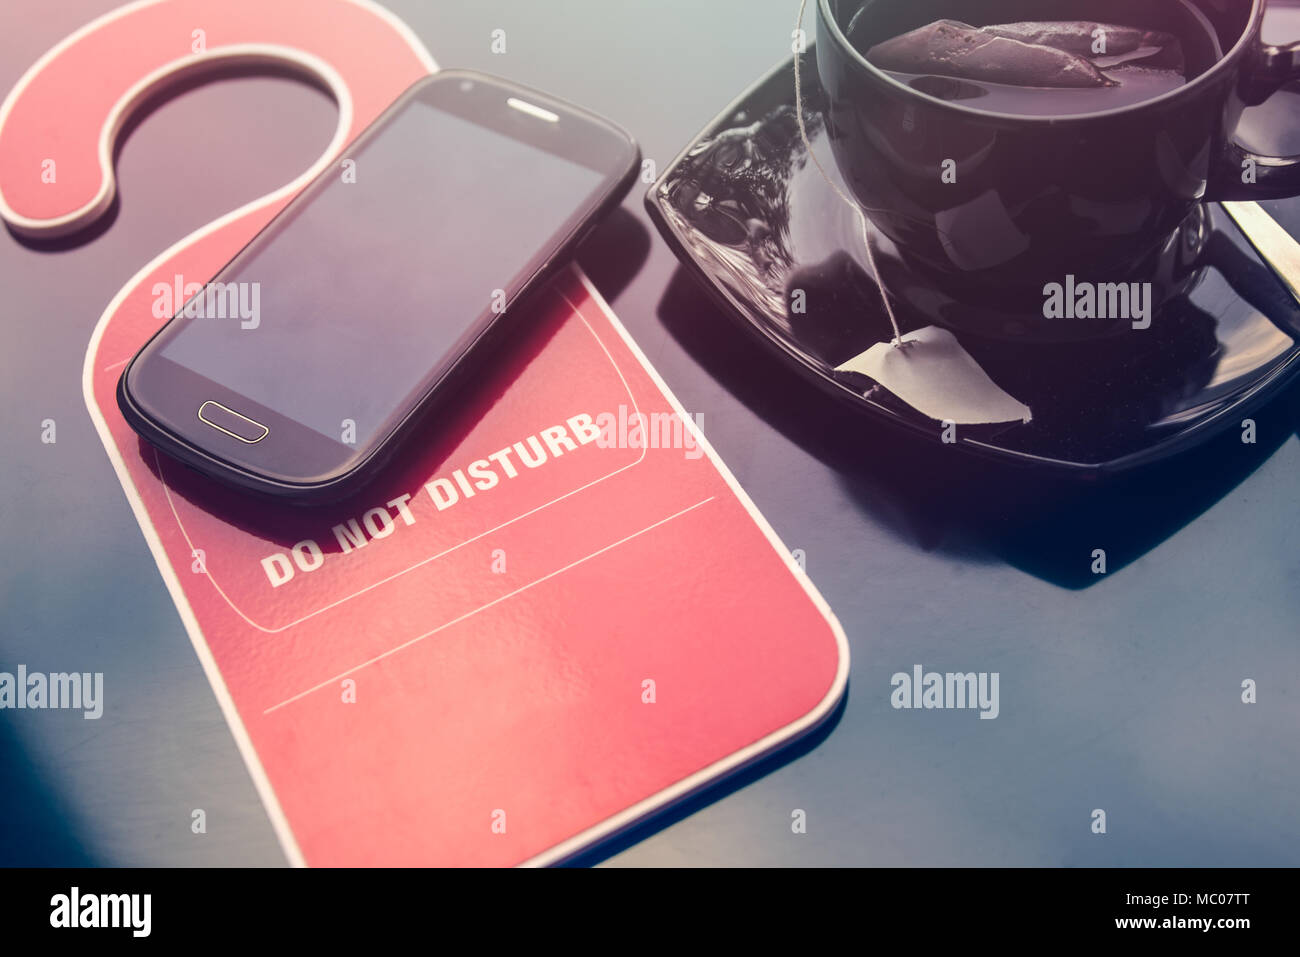 Do not disturbe sign, a cup of tea and a mobile phone over dark background. Time for rest concept. Stock Photo